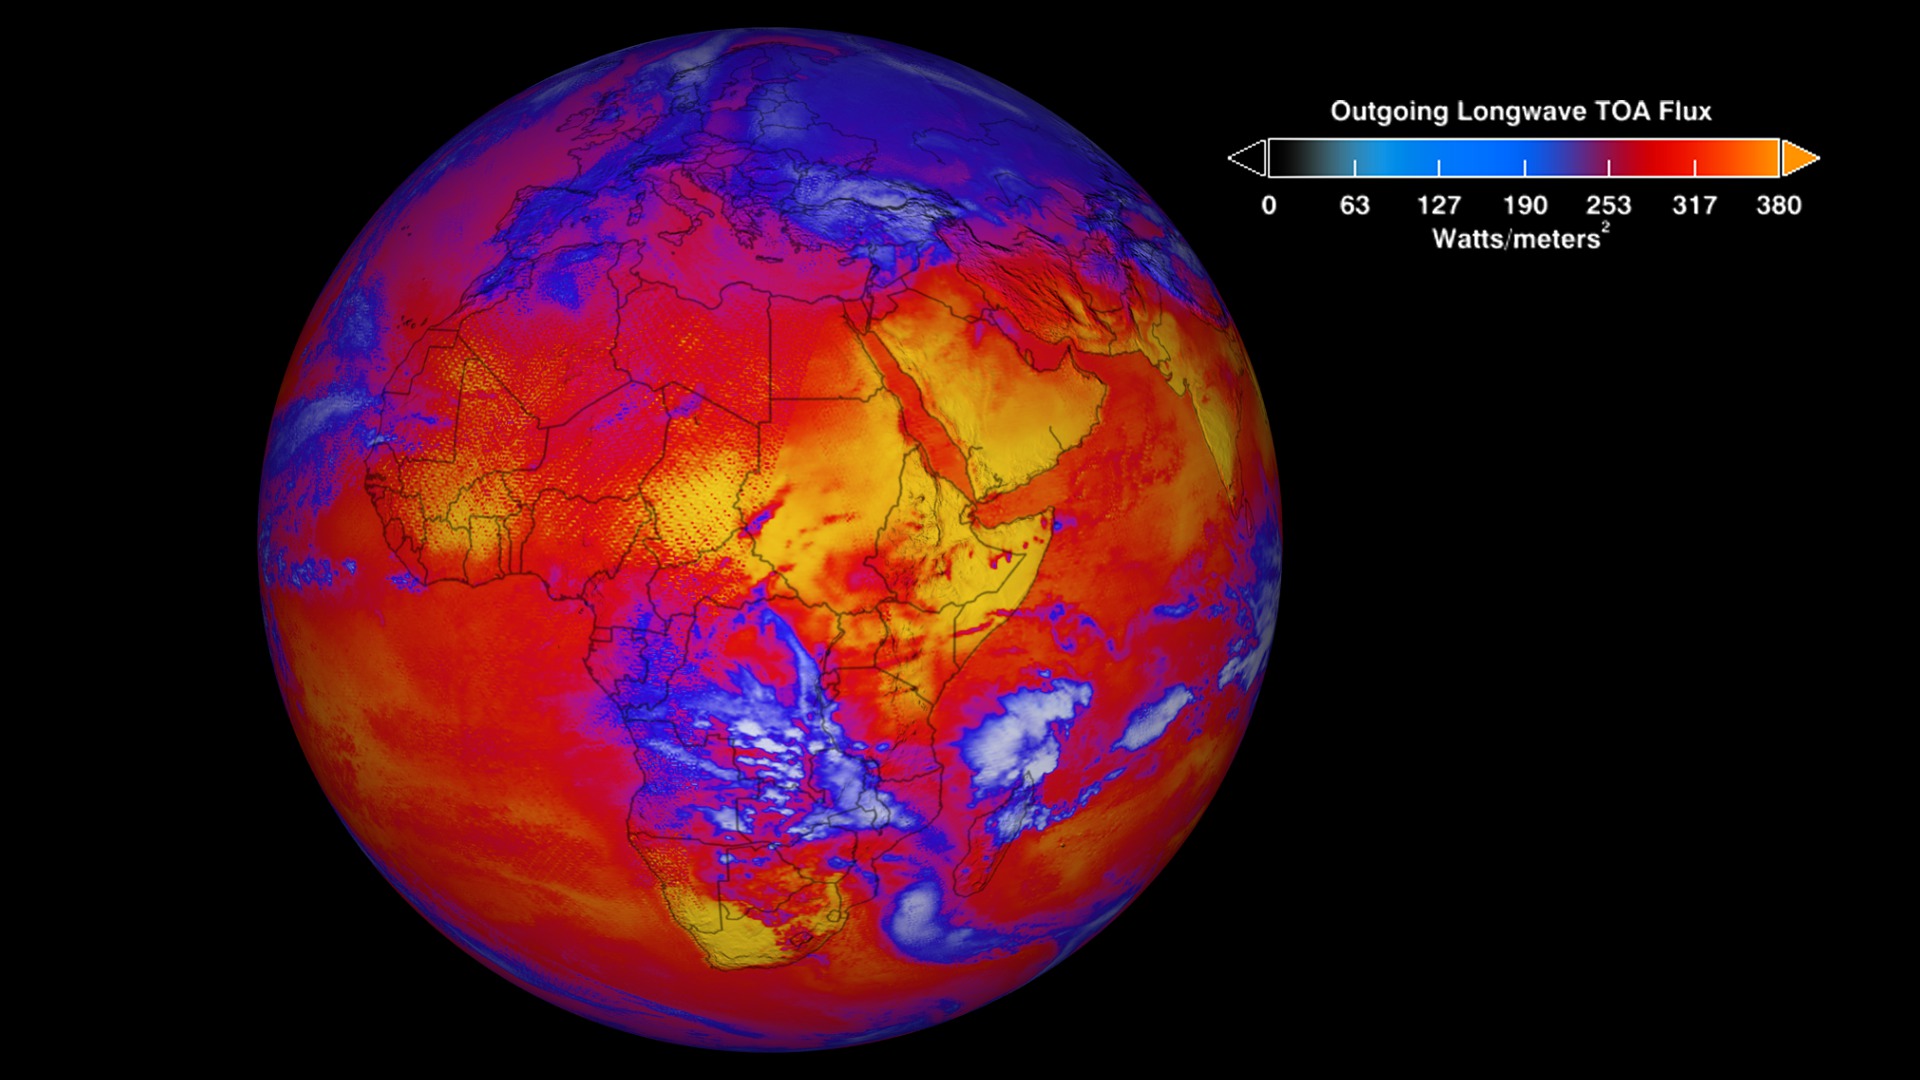 This is  longwave flux radiation at the top-of-atmosphere from Jan 26-27, 2012. Heat energy radiated from Earth (in watts per square meter) is shown in shades of yellow, red, blue and white. The brightest-yellow areas are the hottest and are emitting the most energy out to space, while the dark blue areas and the bright white clouds are much colder, emitting the least energy. This version has a colortable overlay.